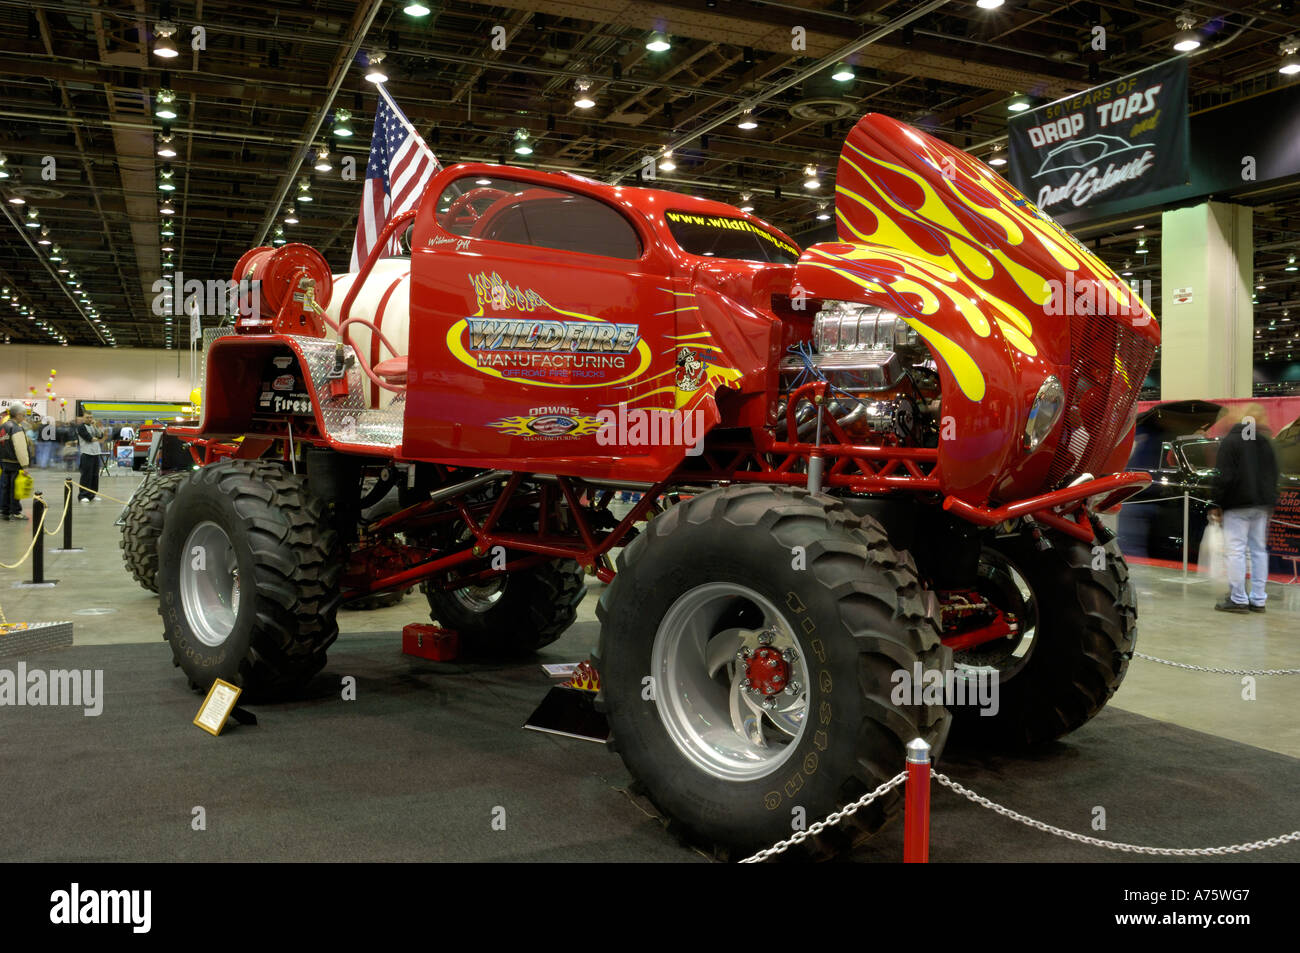 1937 Ford fire truck monster truck at the 2006 Detroit Autorama Stock Photo